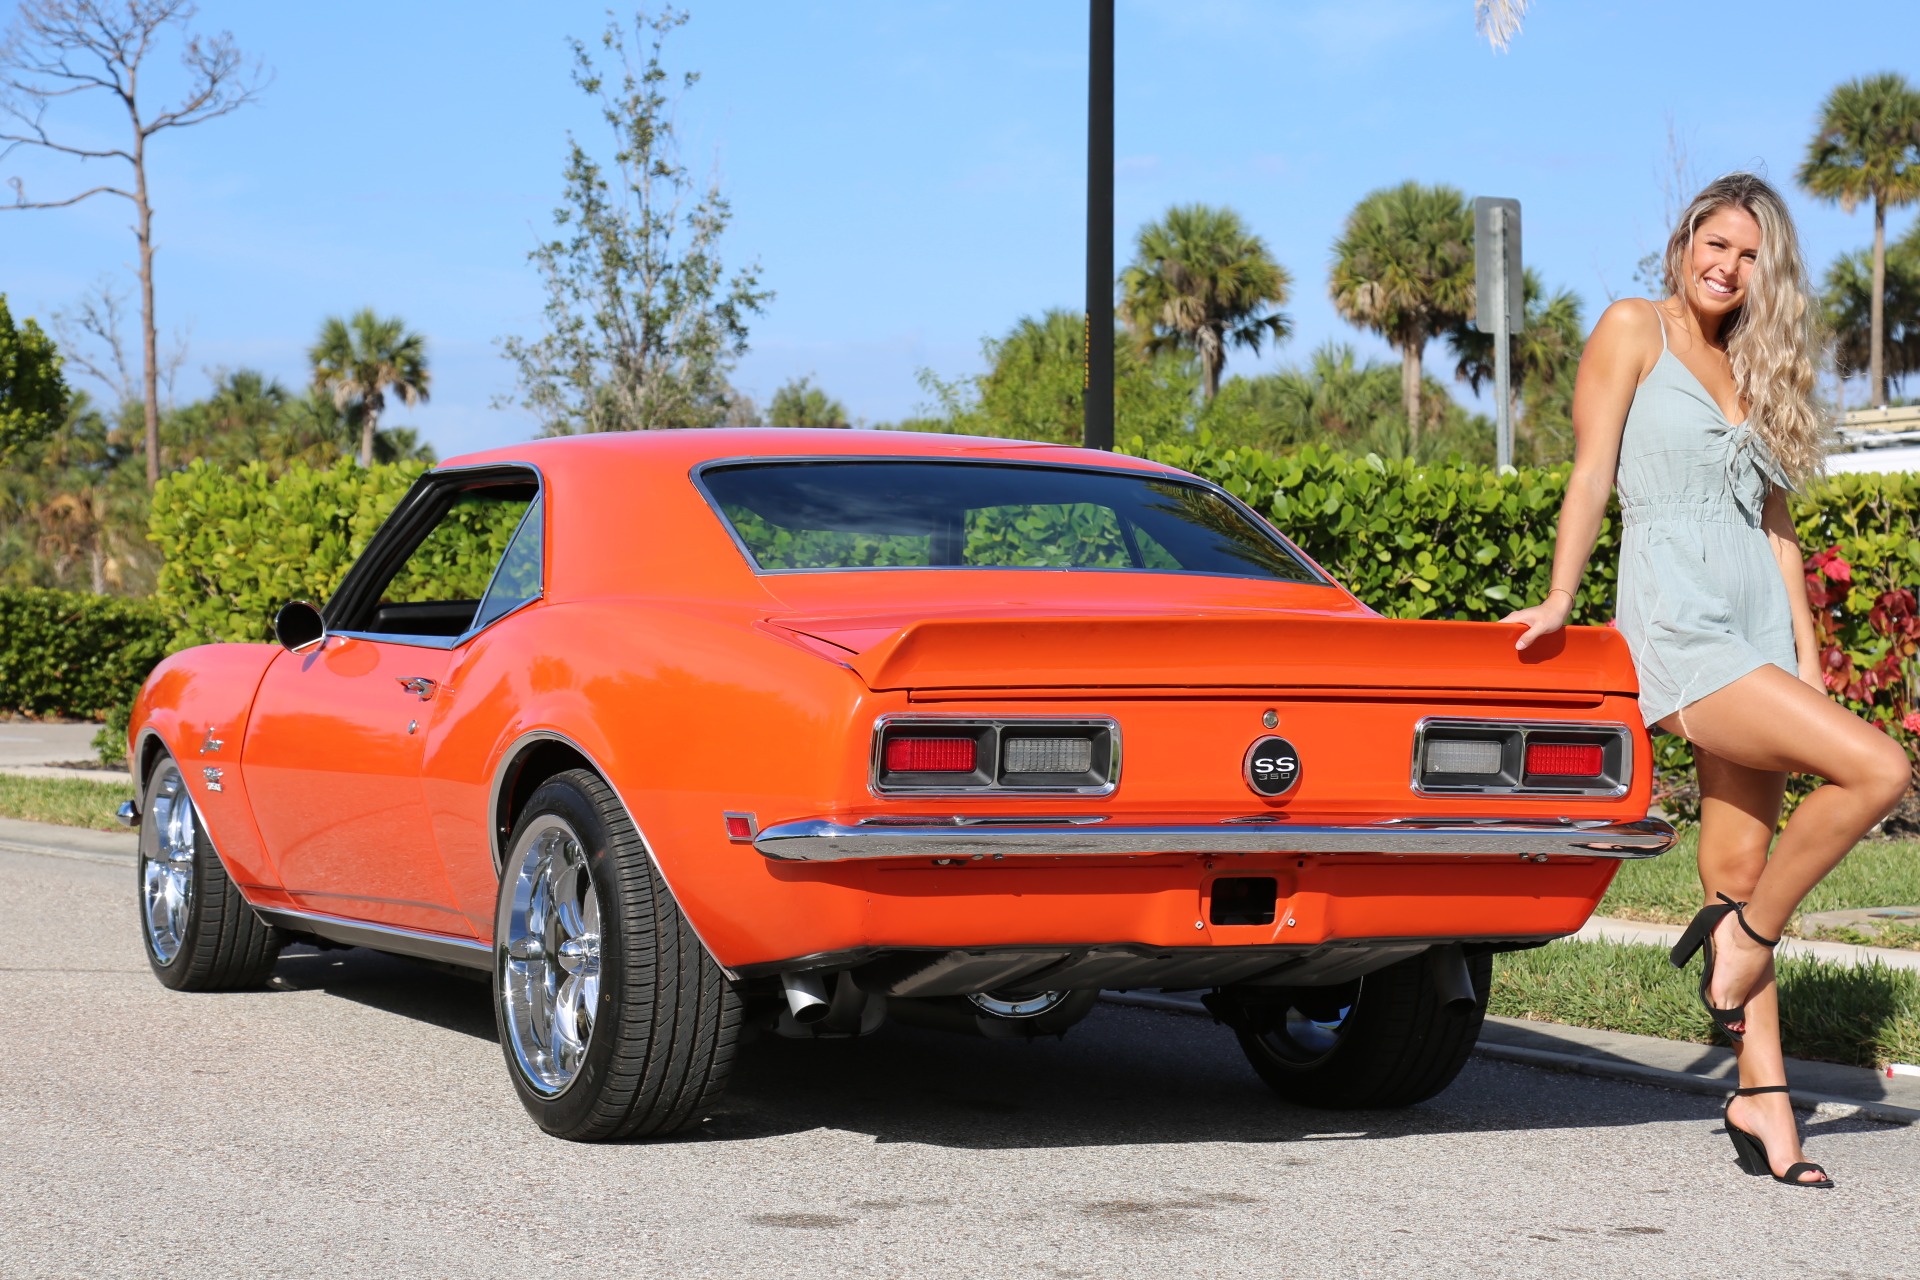 Used 1968 Chevy Camaro V8 4 Speed Manual for sale Sold at Muscle Cars for Sale Inc. in Fort Myers FL 33912 8